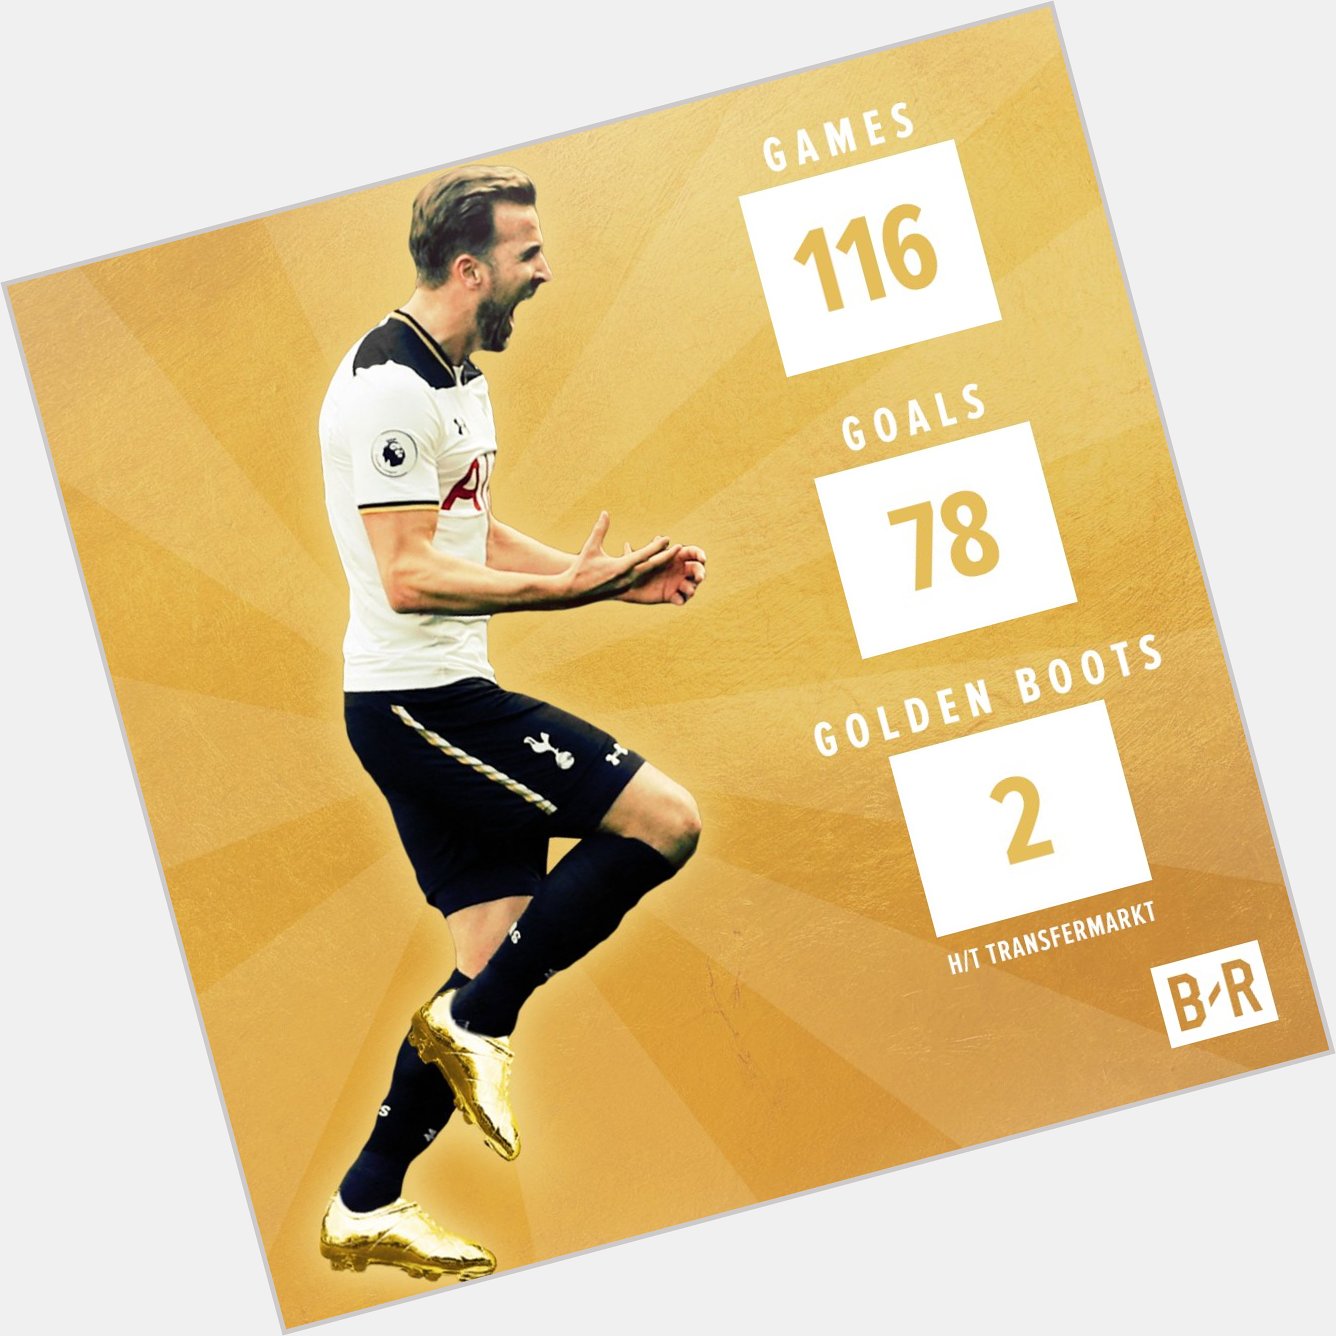 Happy birthday to Harry Kane, the man with the Golden Boots  